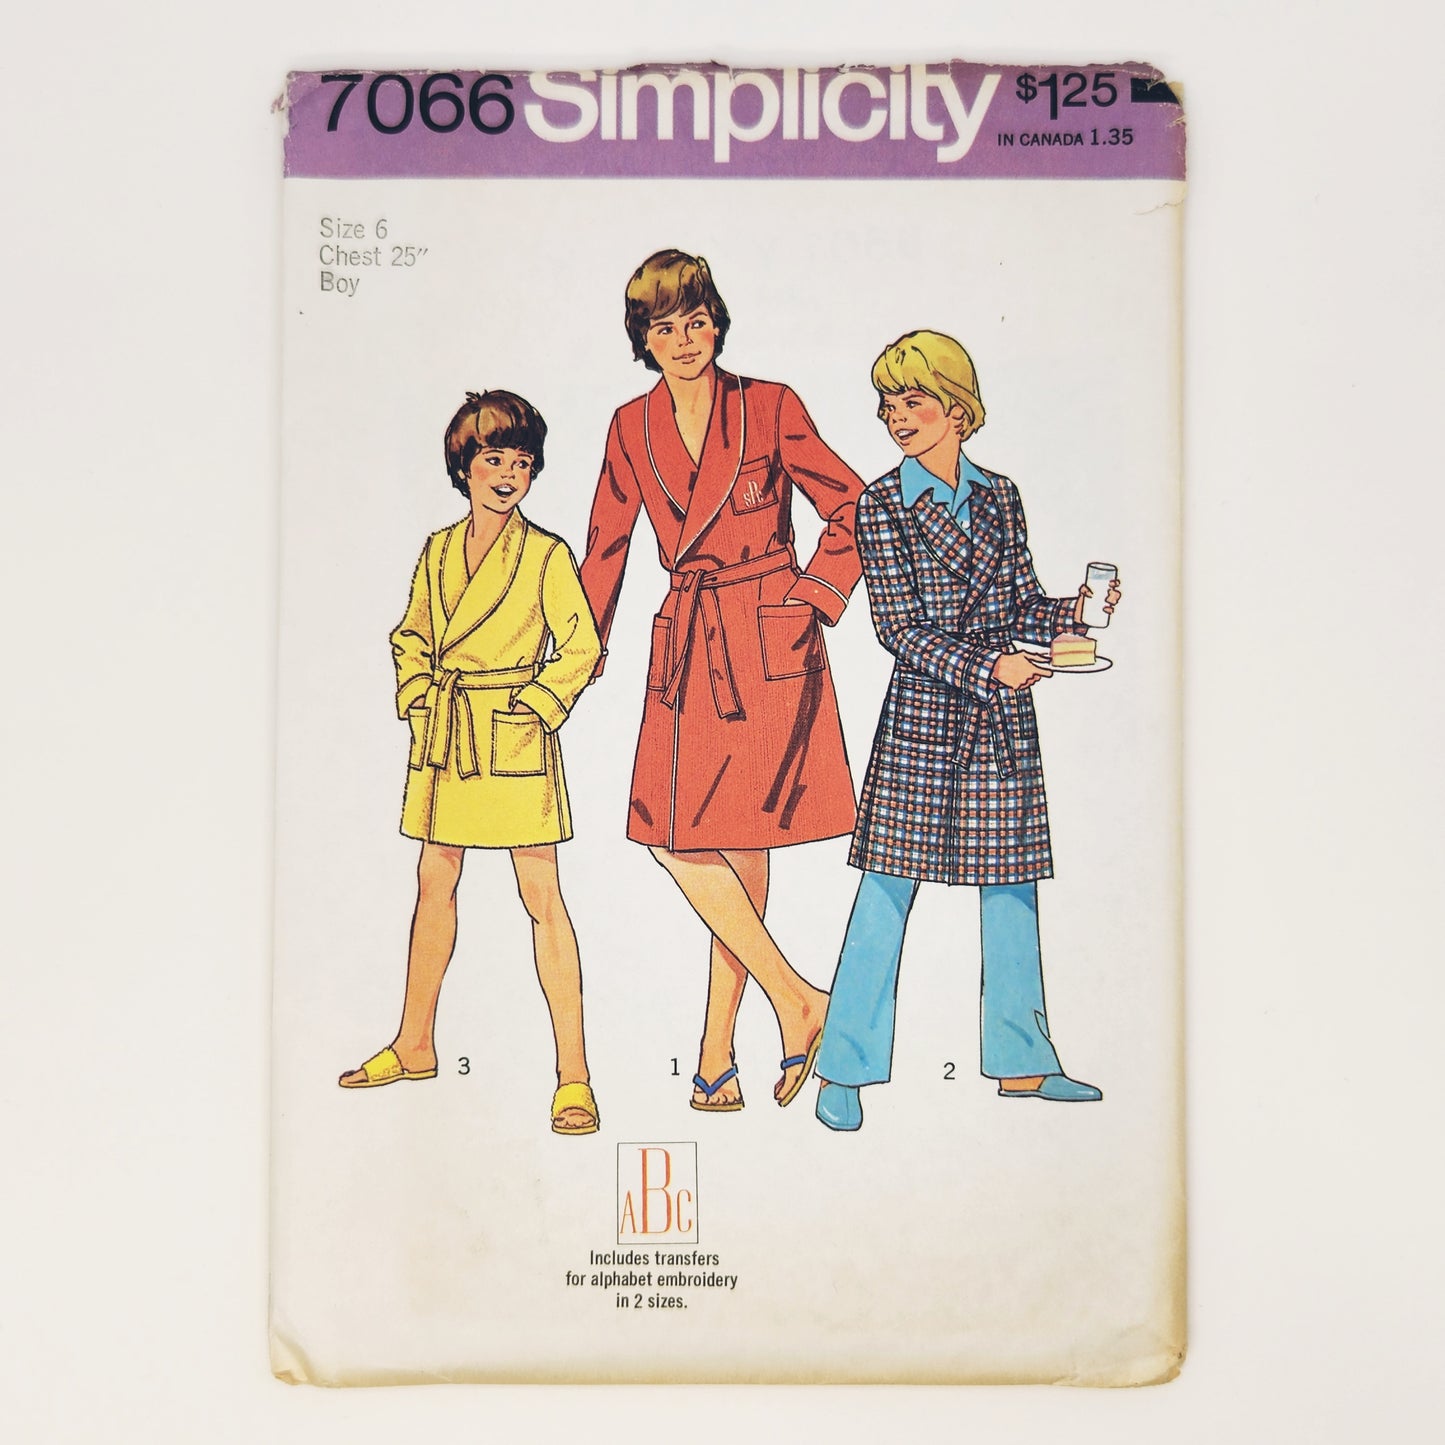 1975 Simplicity Pattern 7066 Boys Robe Two Lengths Size 6